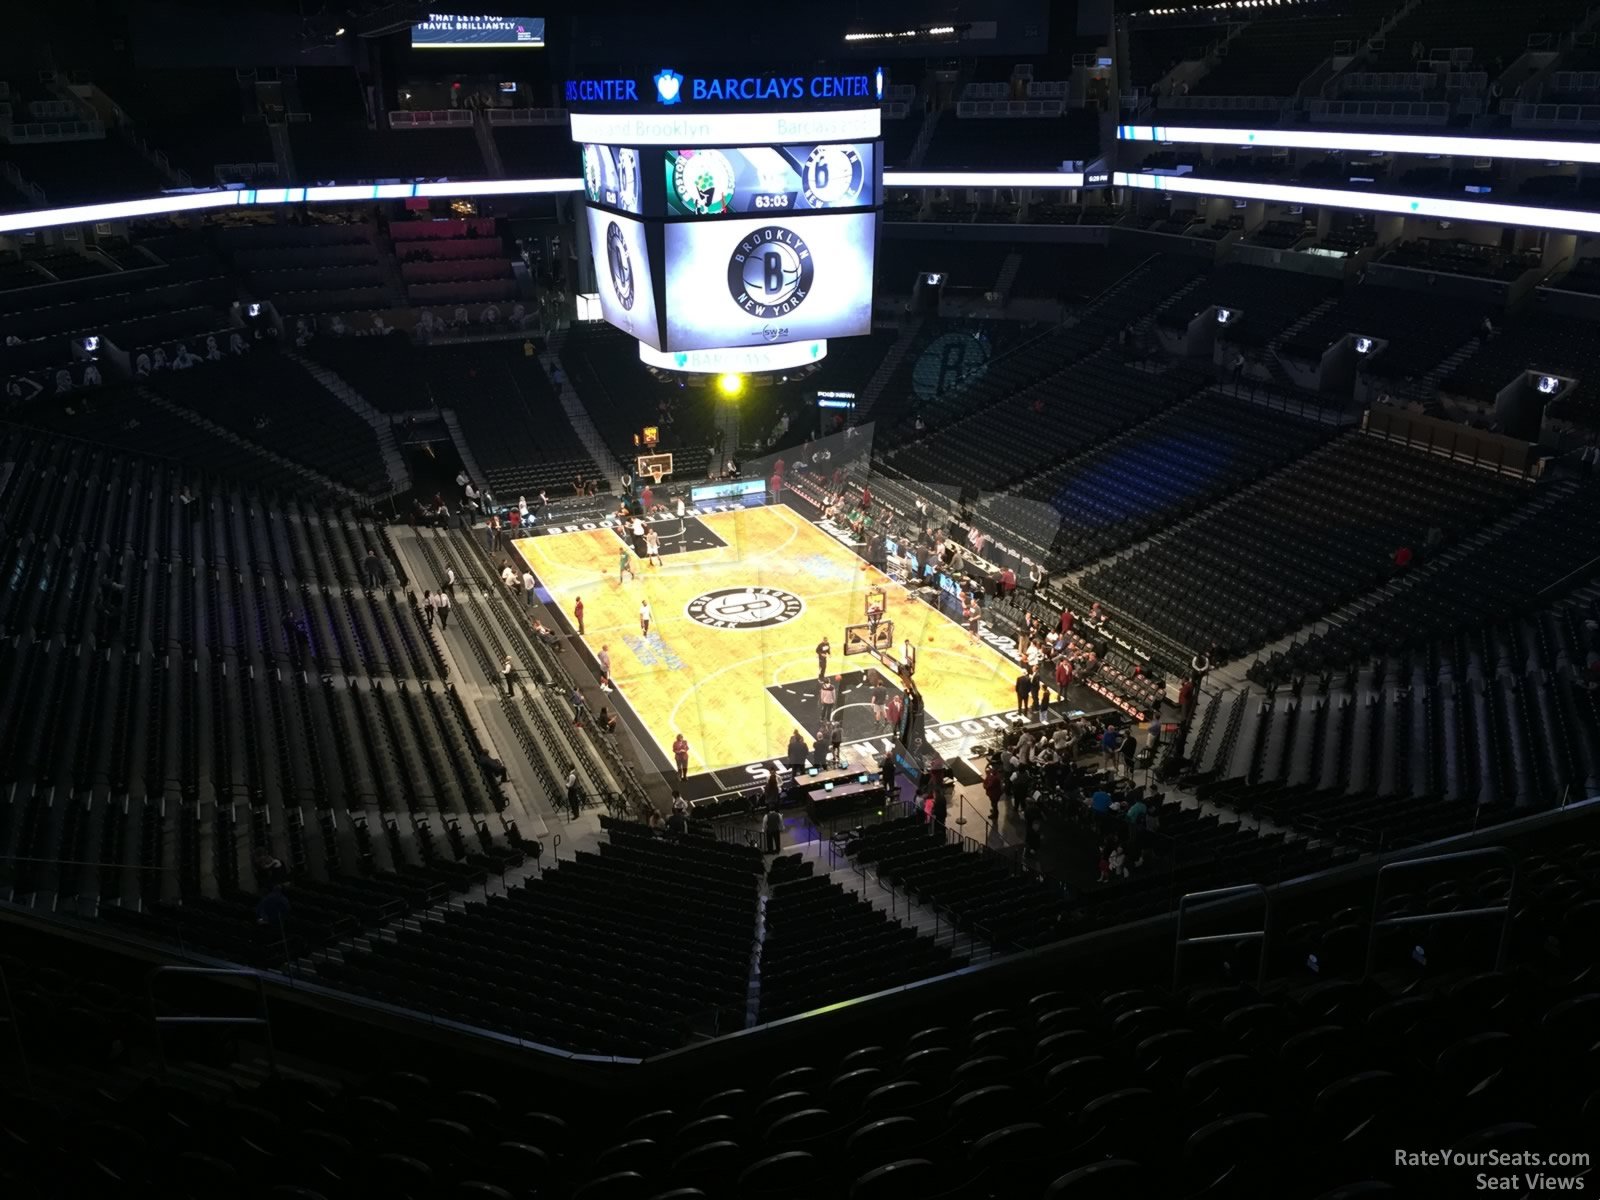 section 218, row 10 seat view  for basketball - barclays center